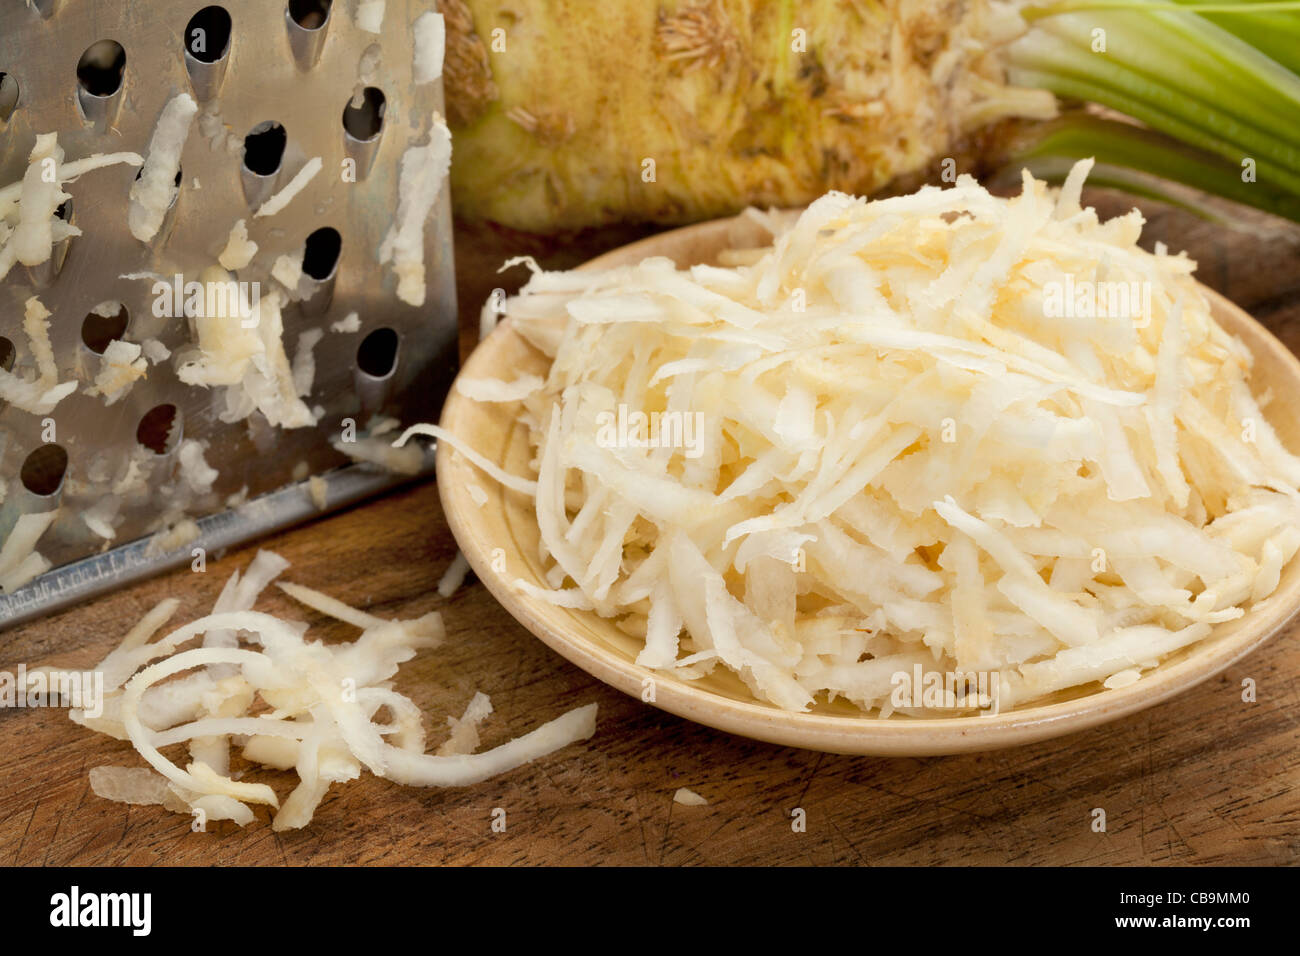 bowl of celery root (celeriac) grated for a salad grated for a salad Stock Photo